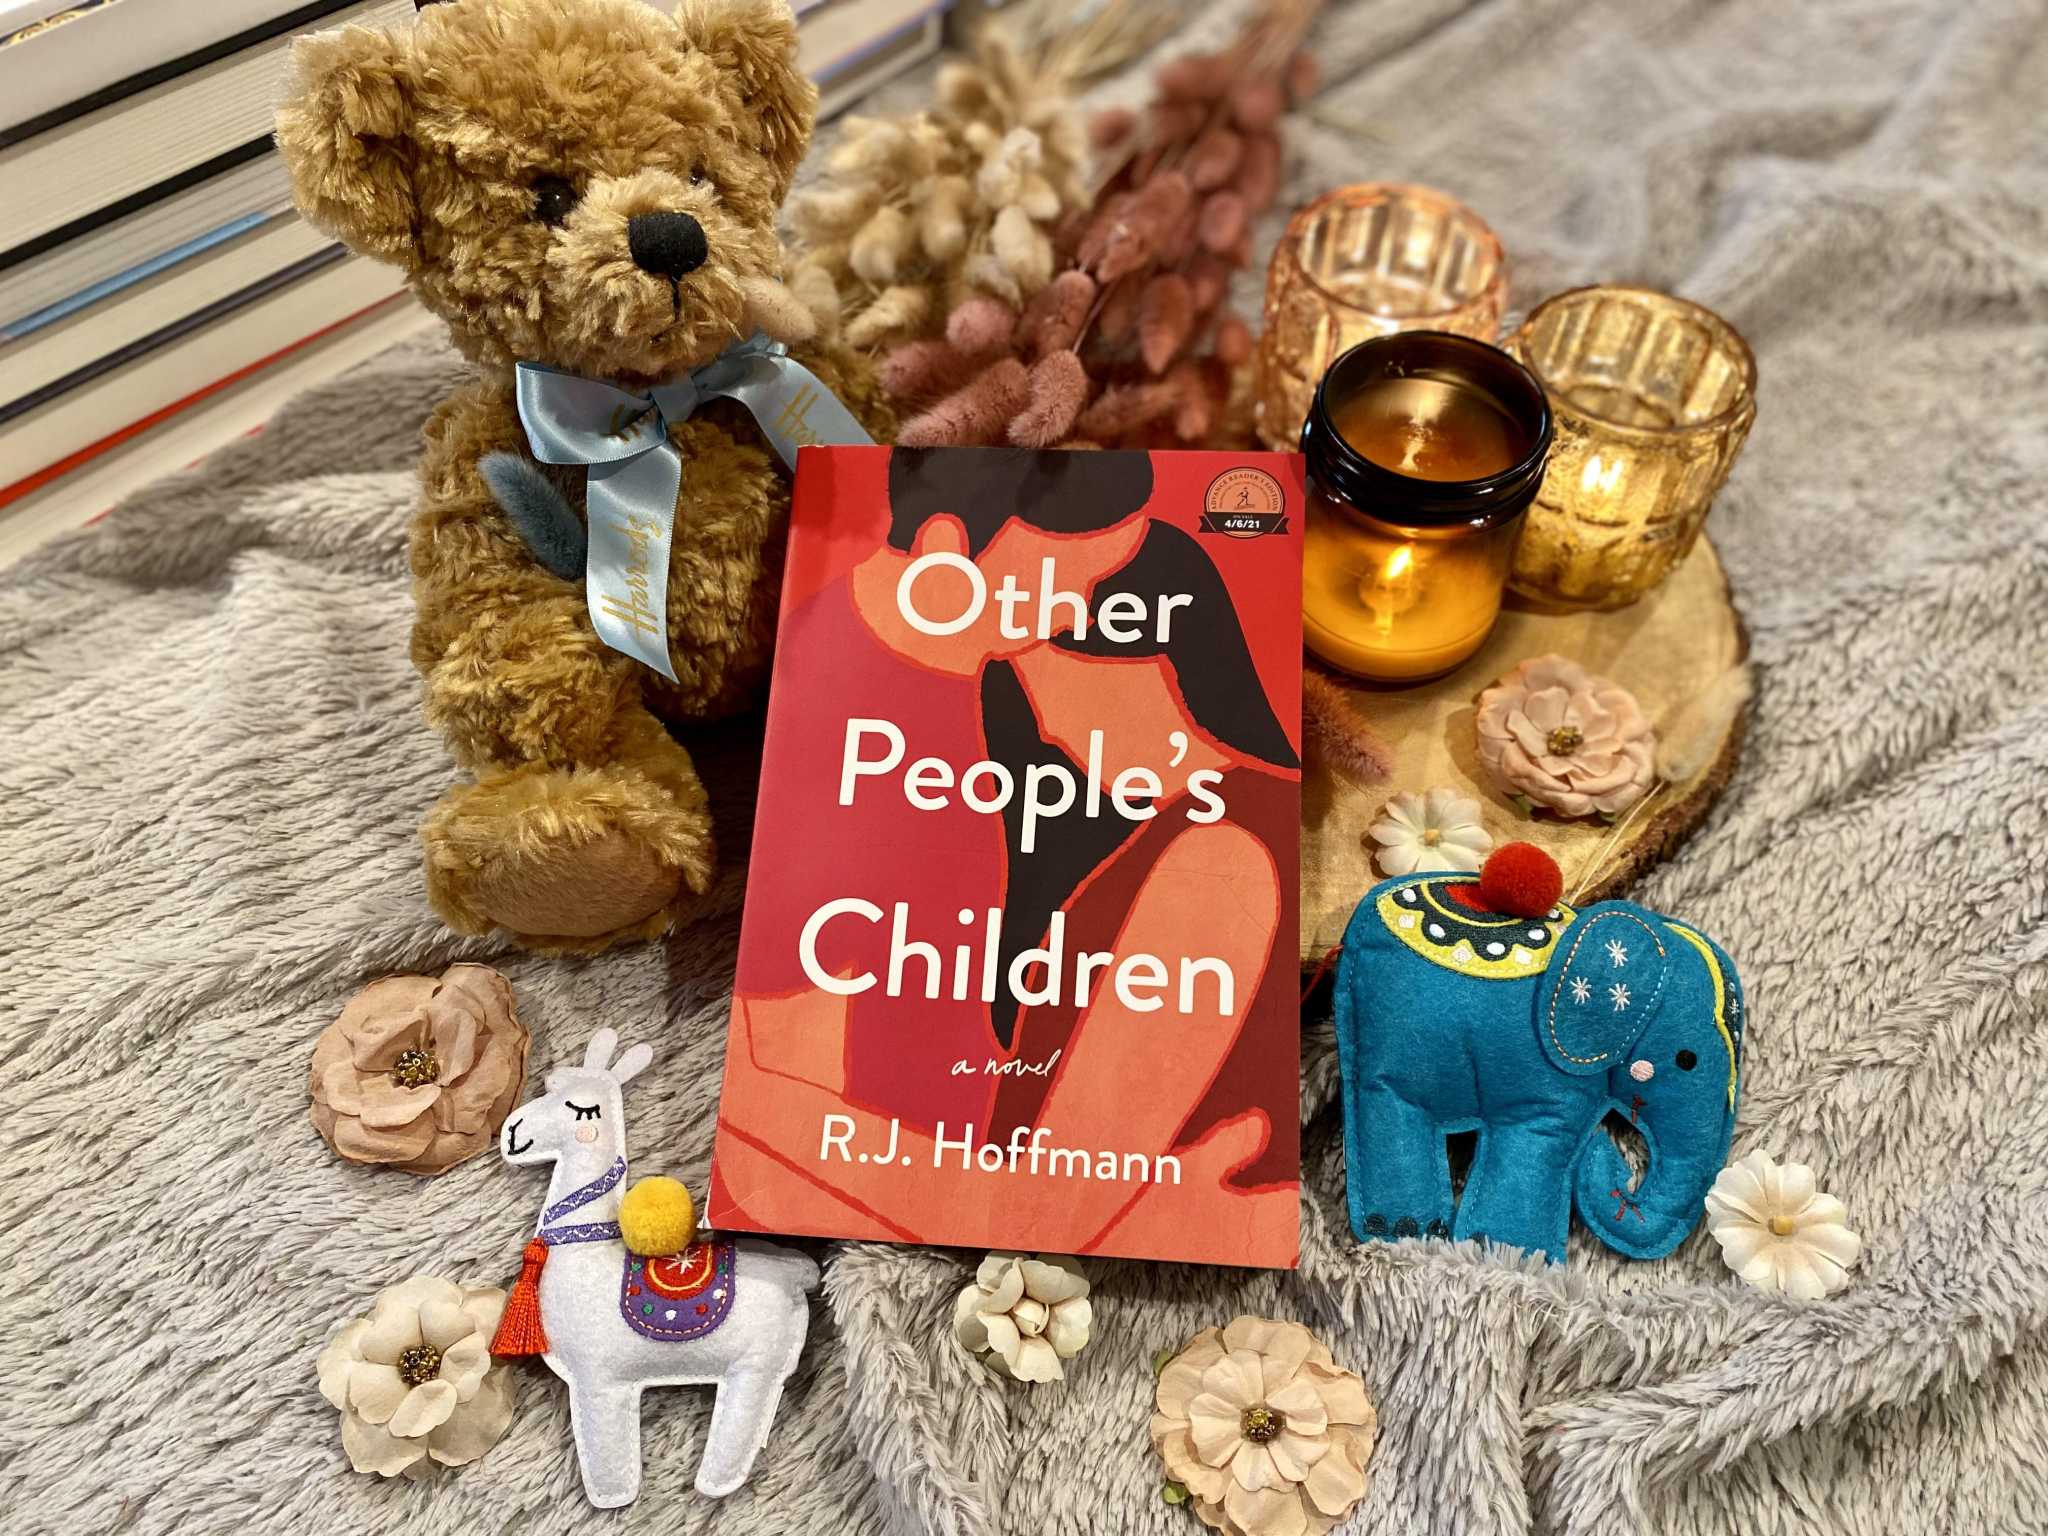 Adoption and custody come into play in ‘Other People’s Children’